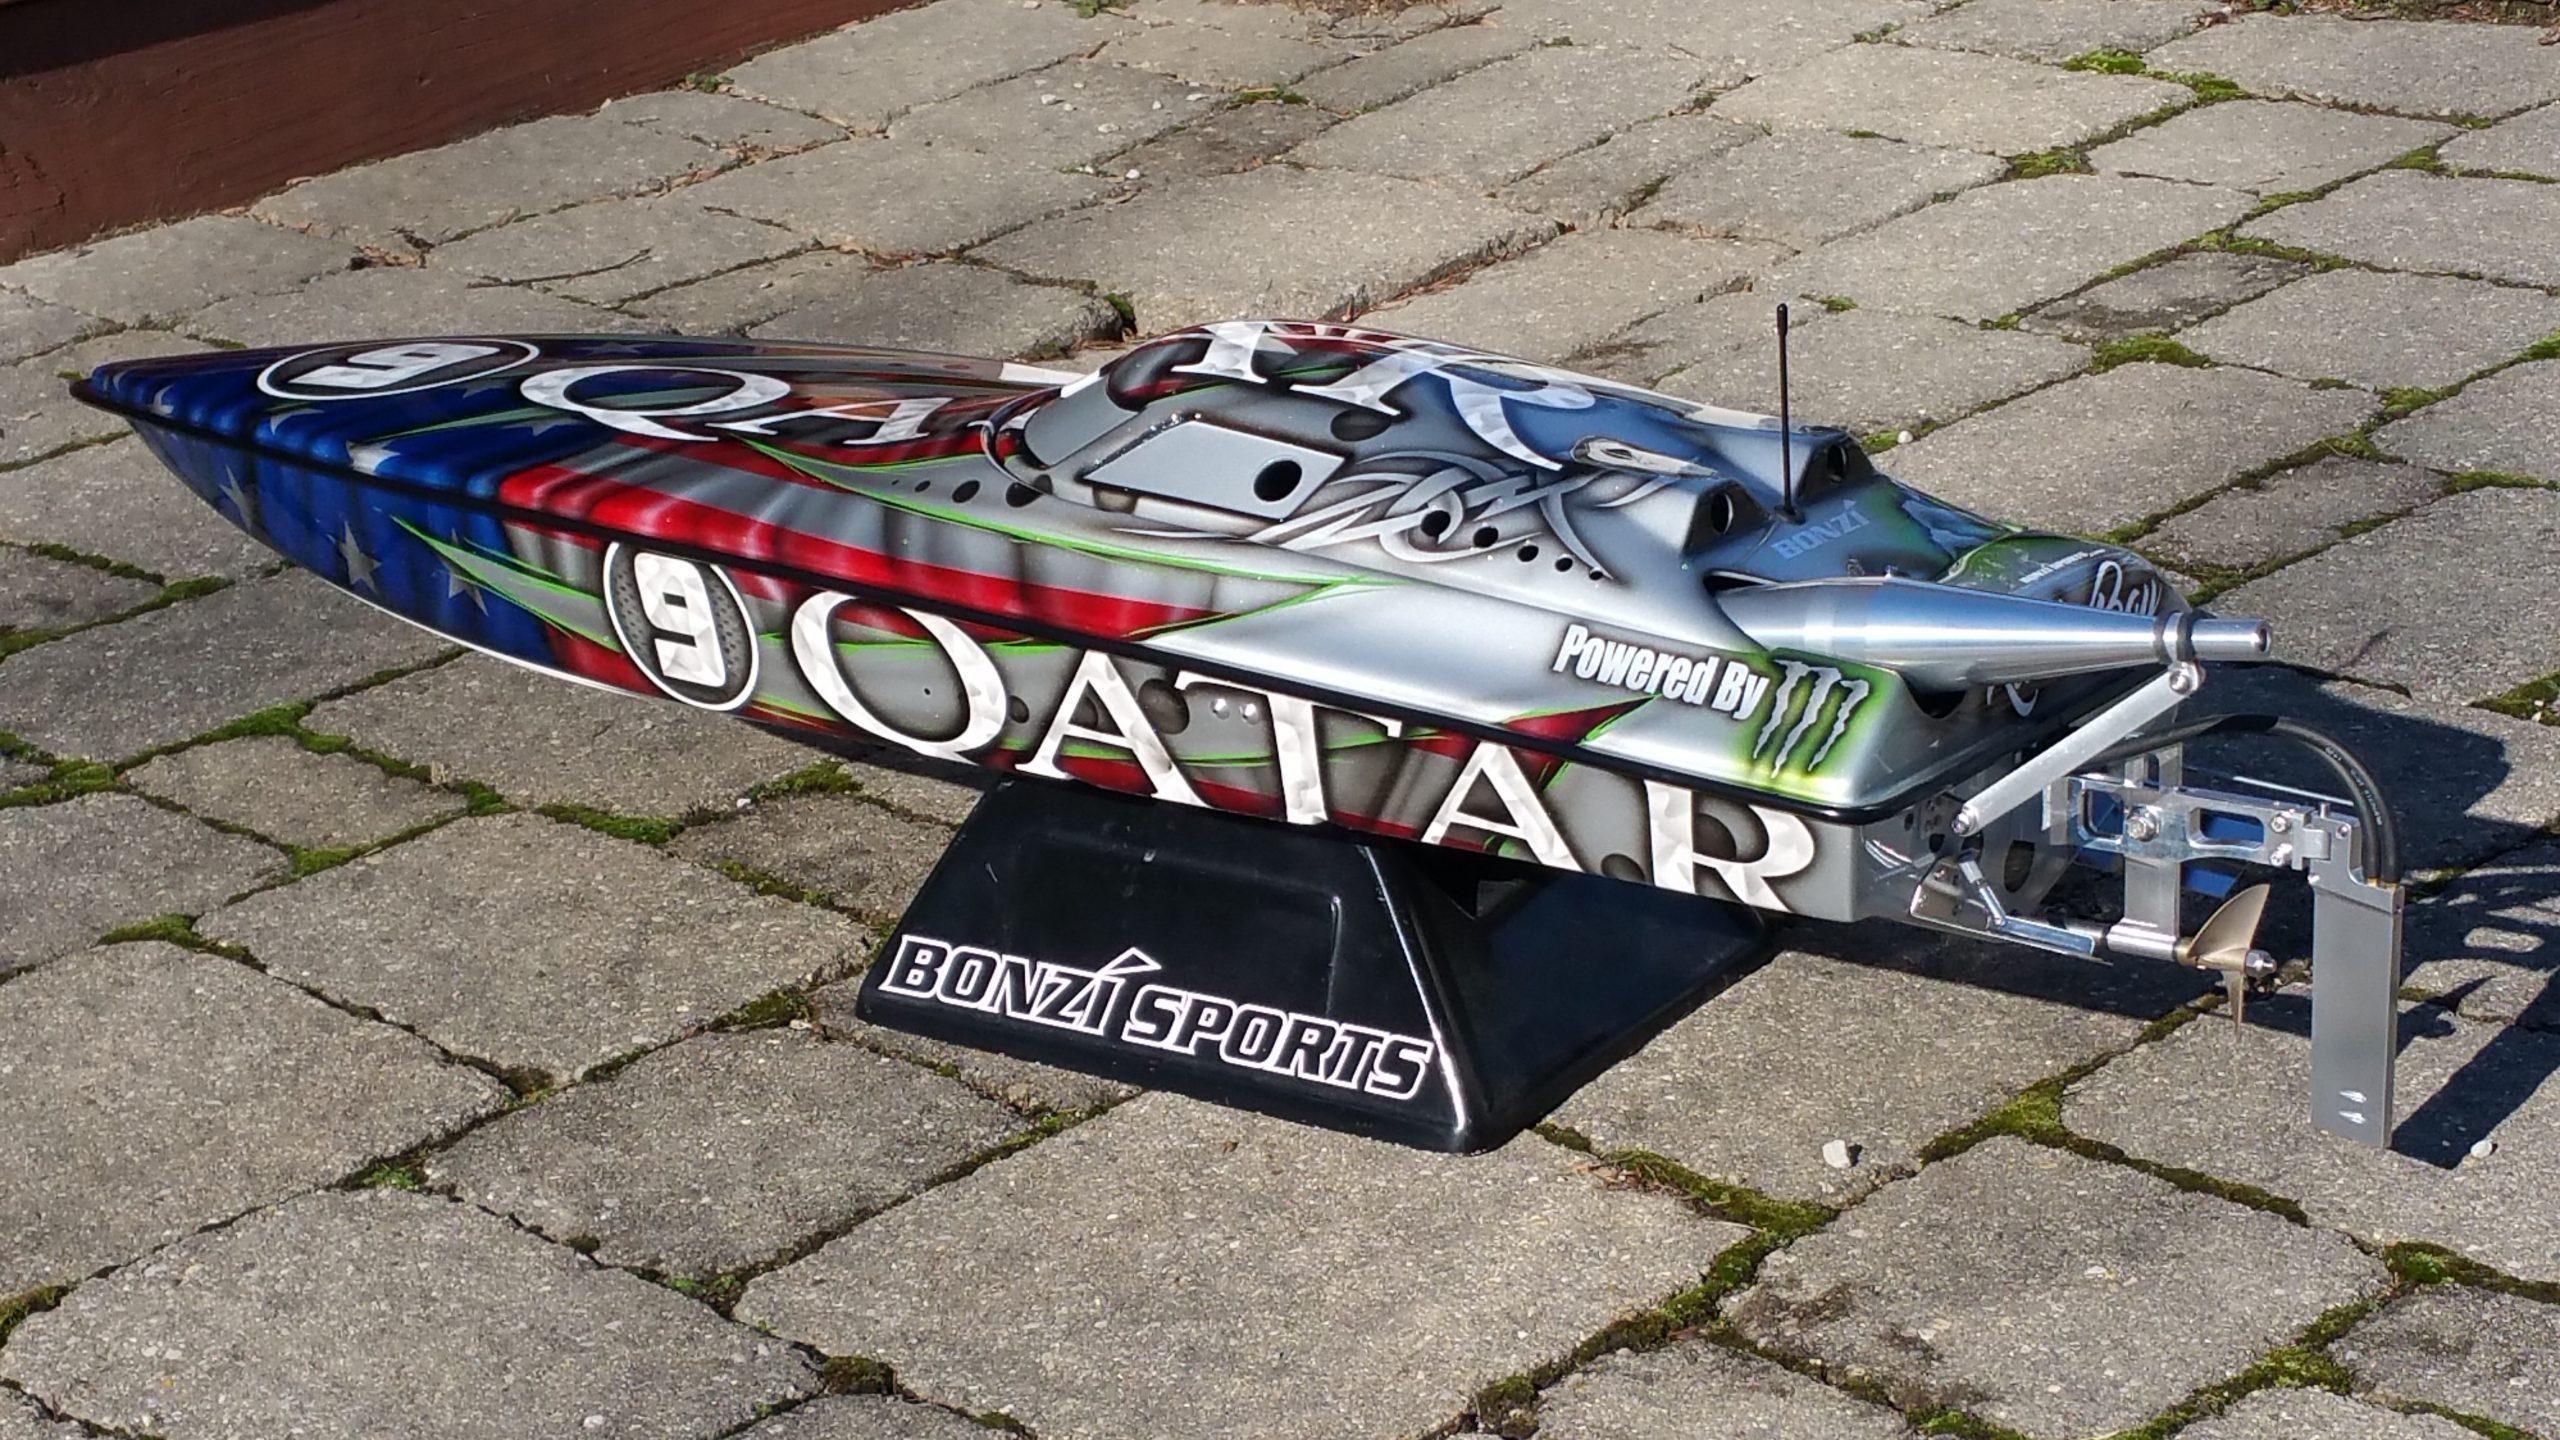 50 Inch Rc Boat: 50 inch RC boats: extreme customization and unique features